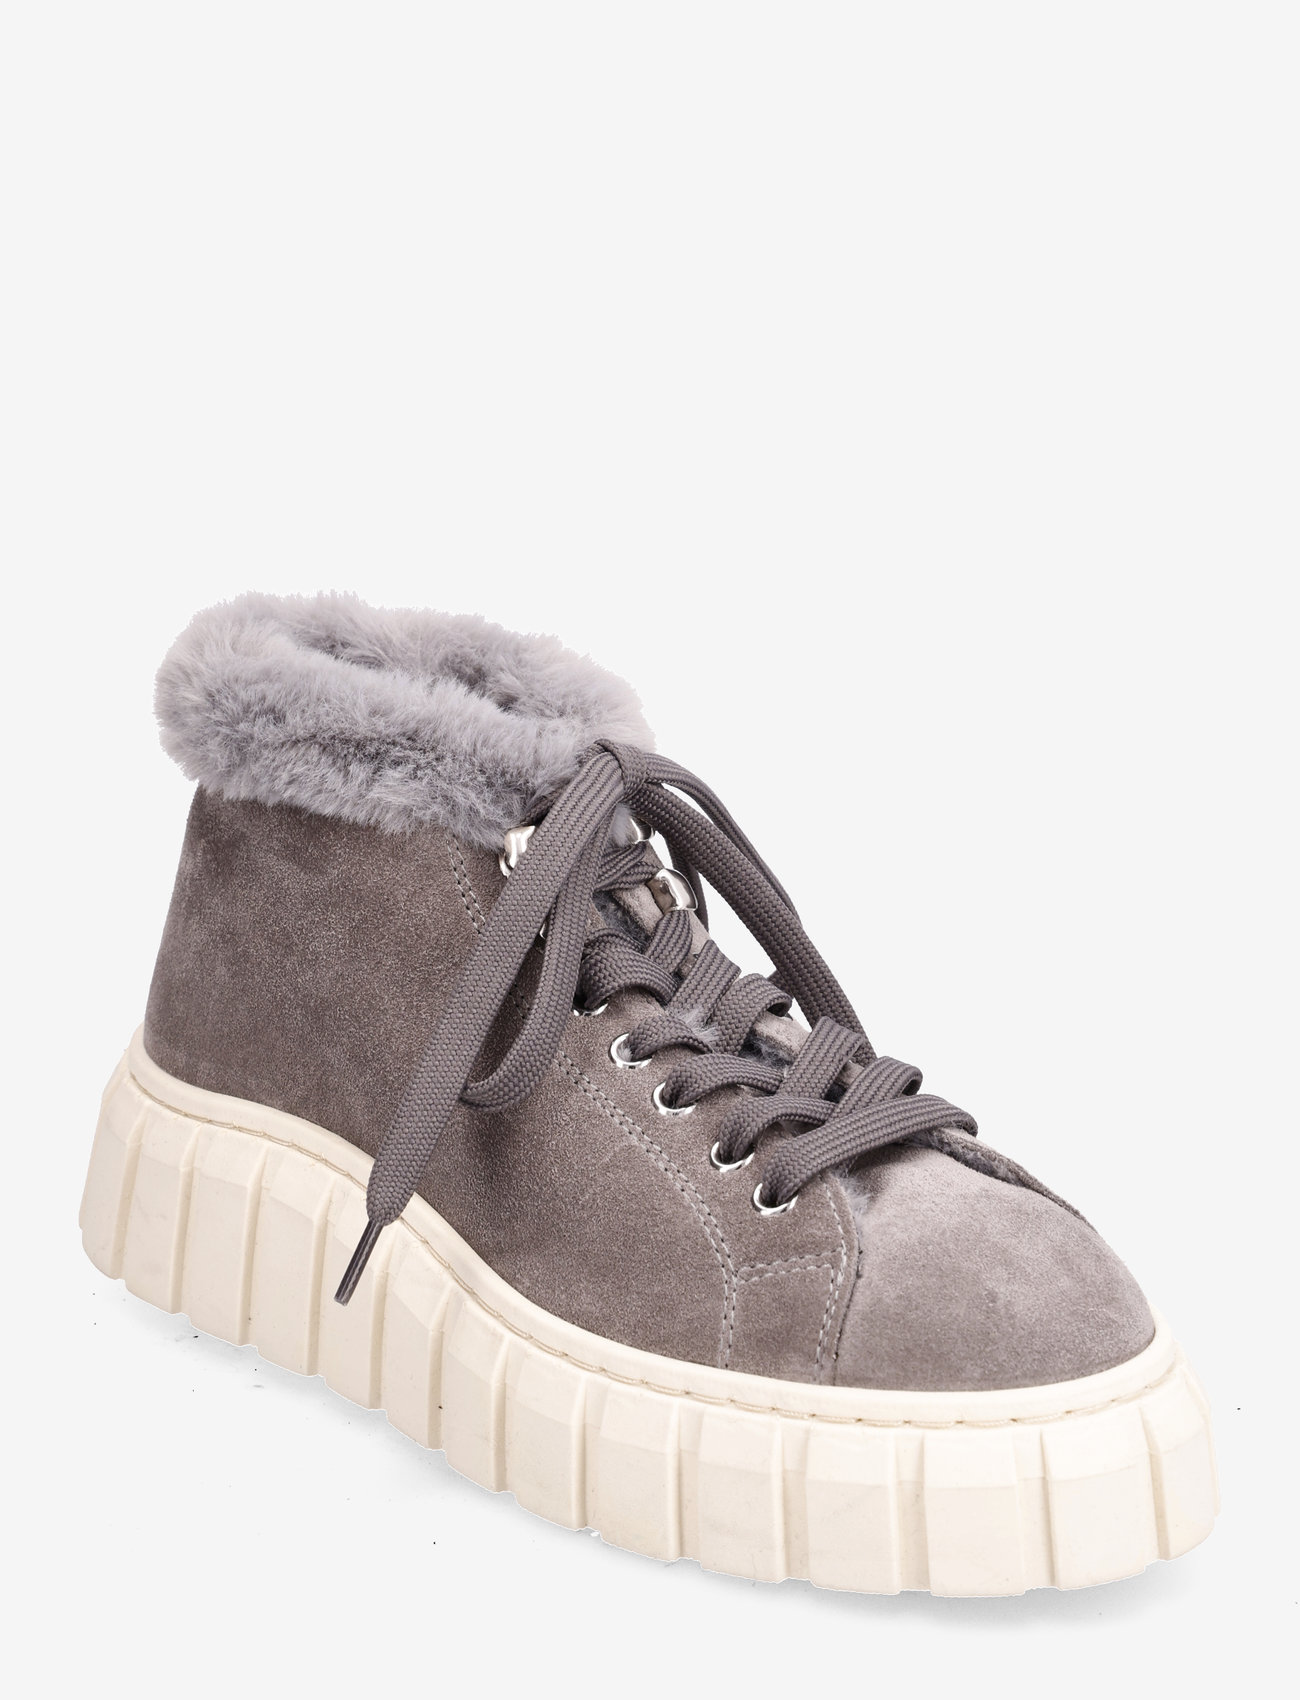 Garment Project - Balo Sneaker Boot - Grey Suede - robustsed tossud - grey - 0